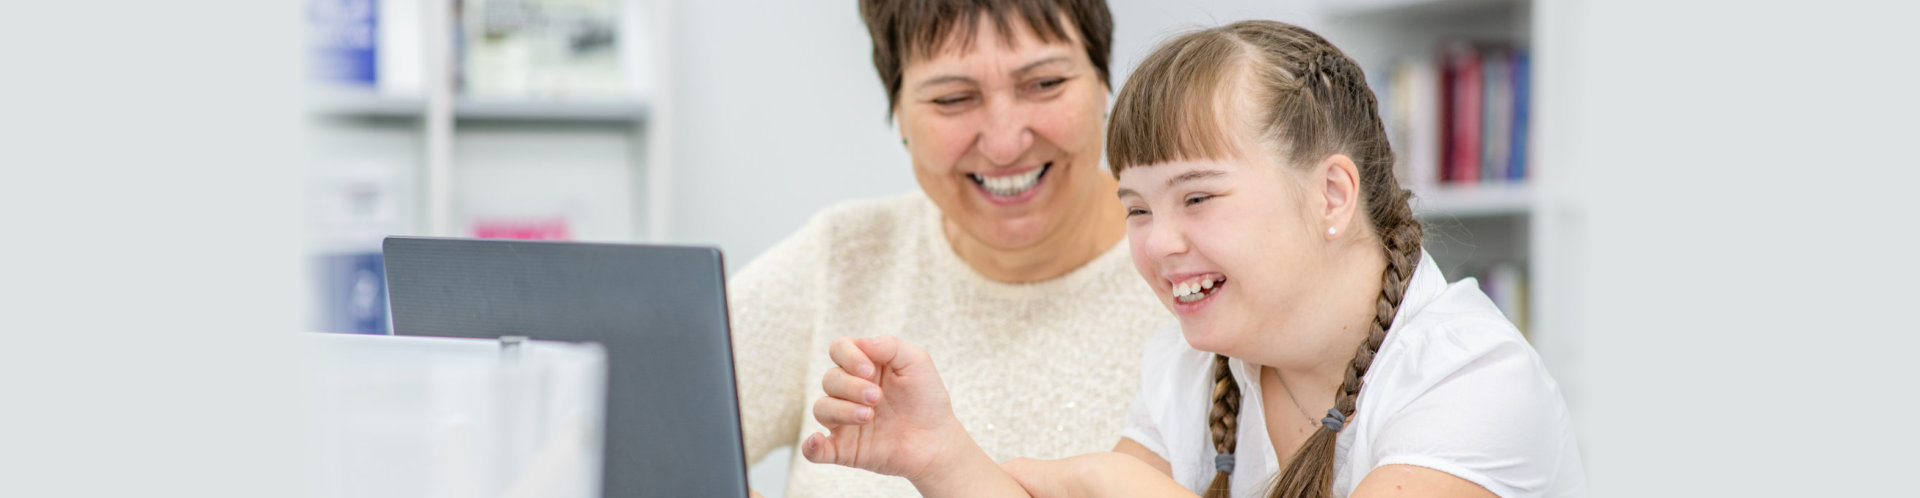 Smiling girl with down syndrome is uses a laptop with her teacher at library